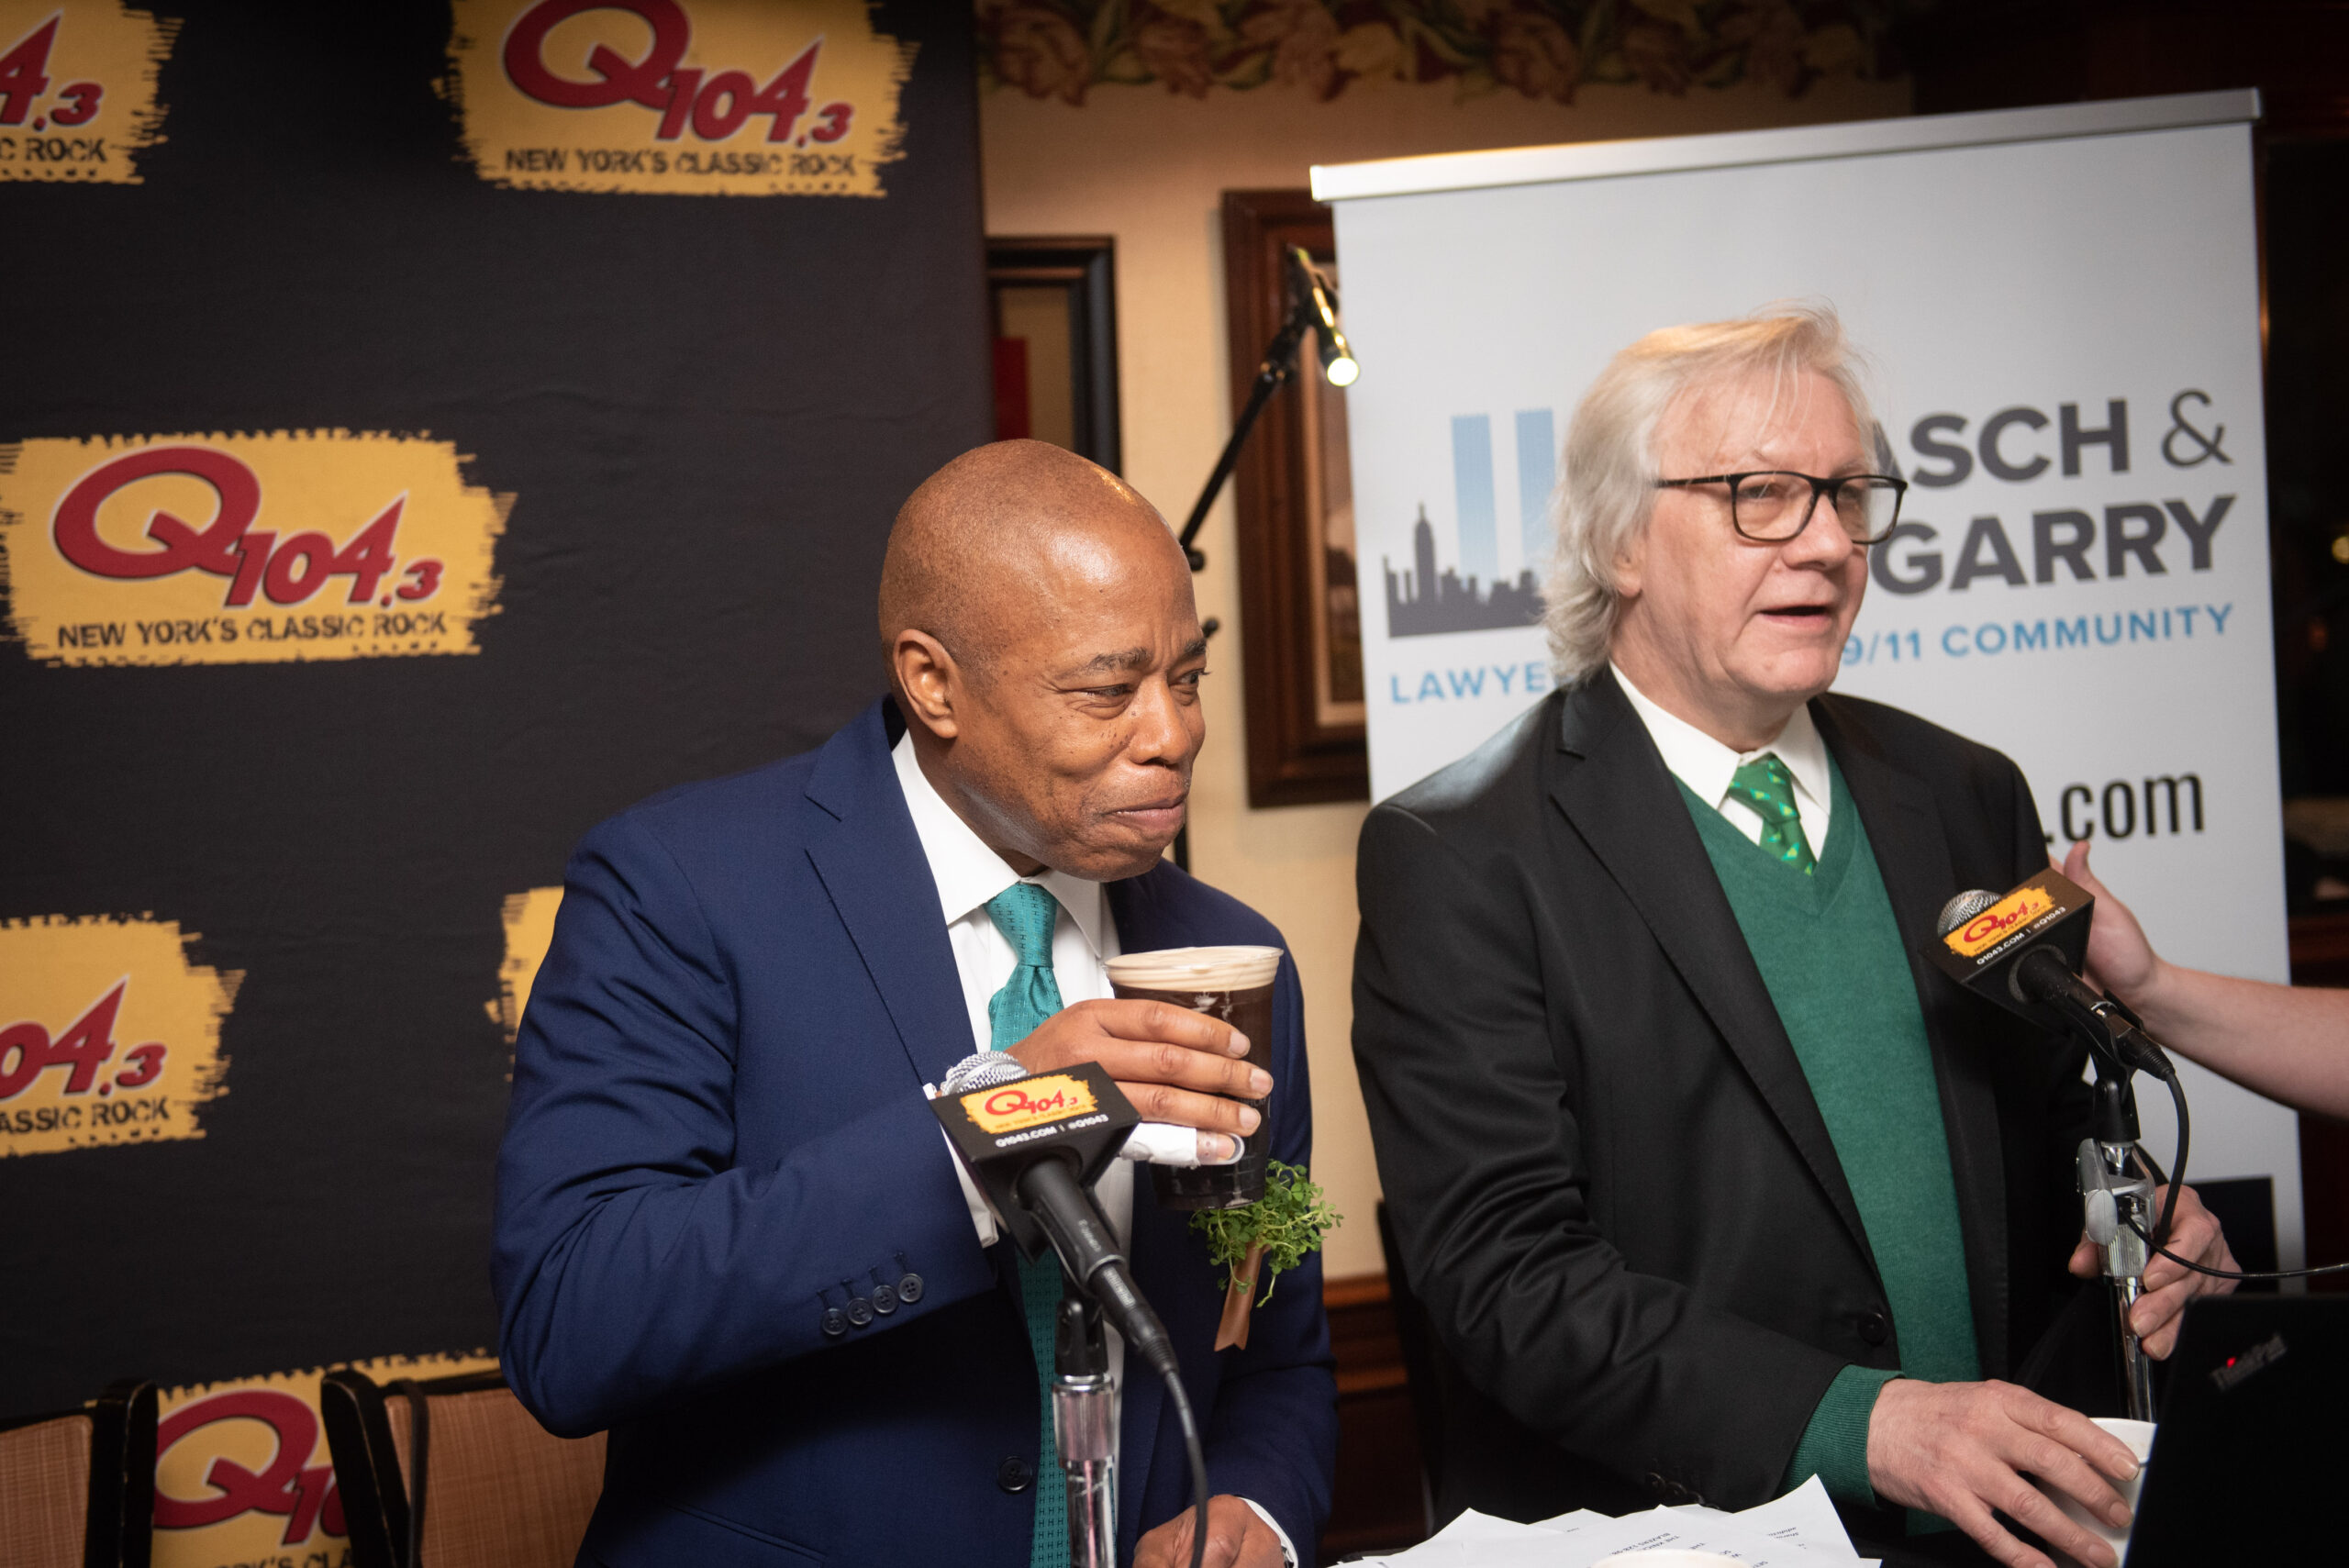 Mayor Eric Adams visits Connolly's Pub in Midtown before marching in St. Patrick’s Day Parade on Fifth Avenue in Manhattan on Thursday, March 17, 2022. Michael Appleton/Mayoral Photography Office